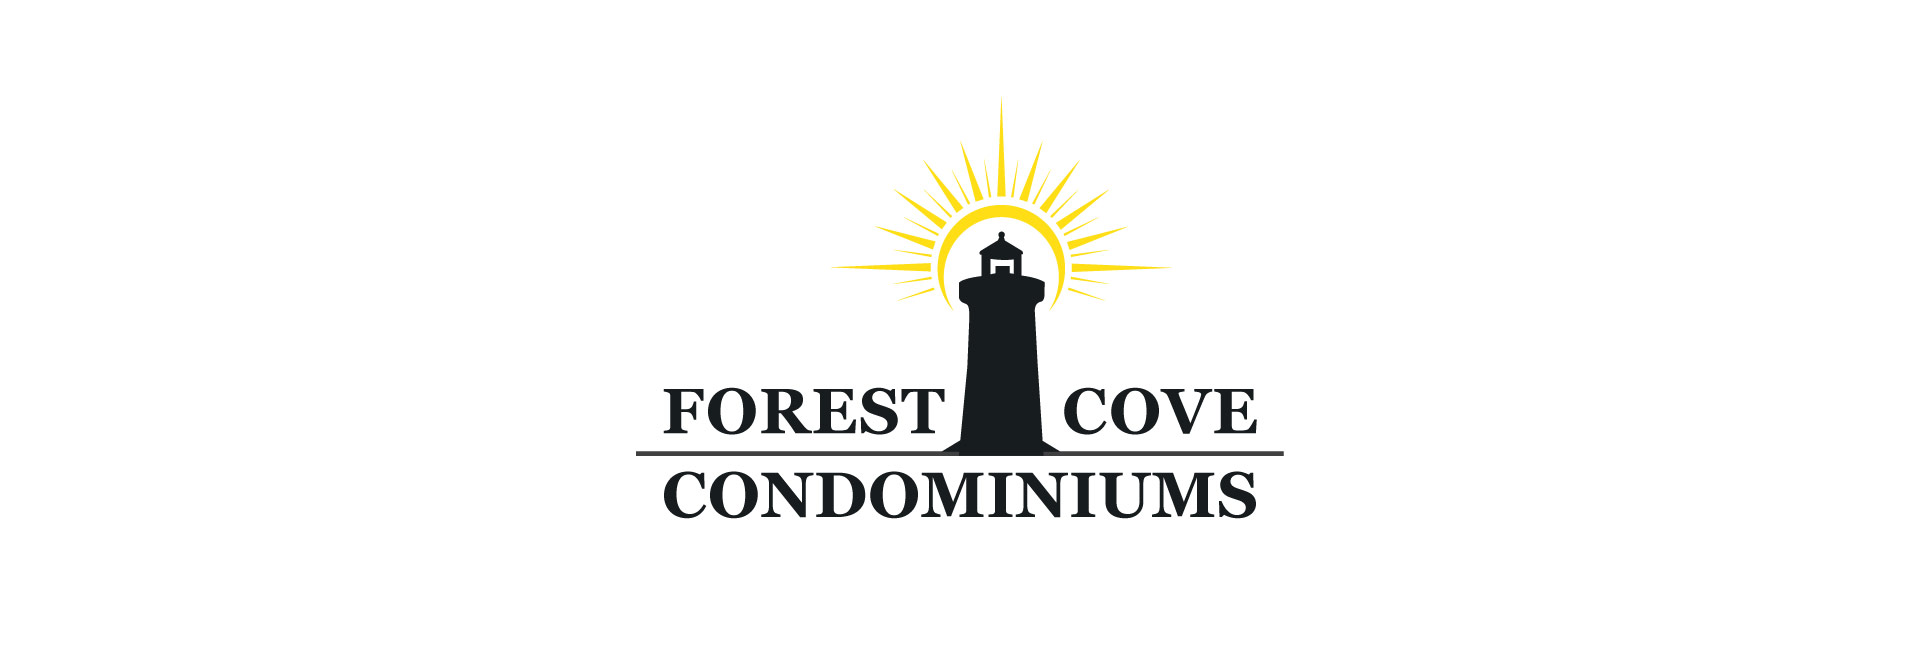 forest cove logo